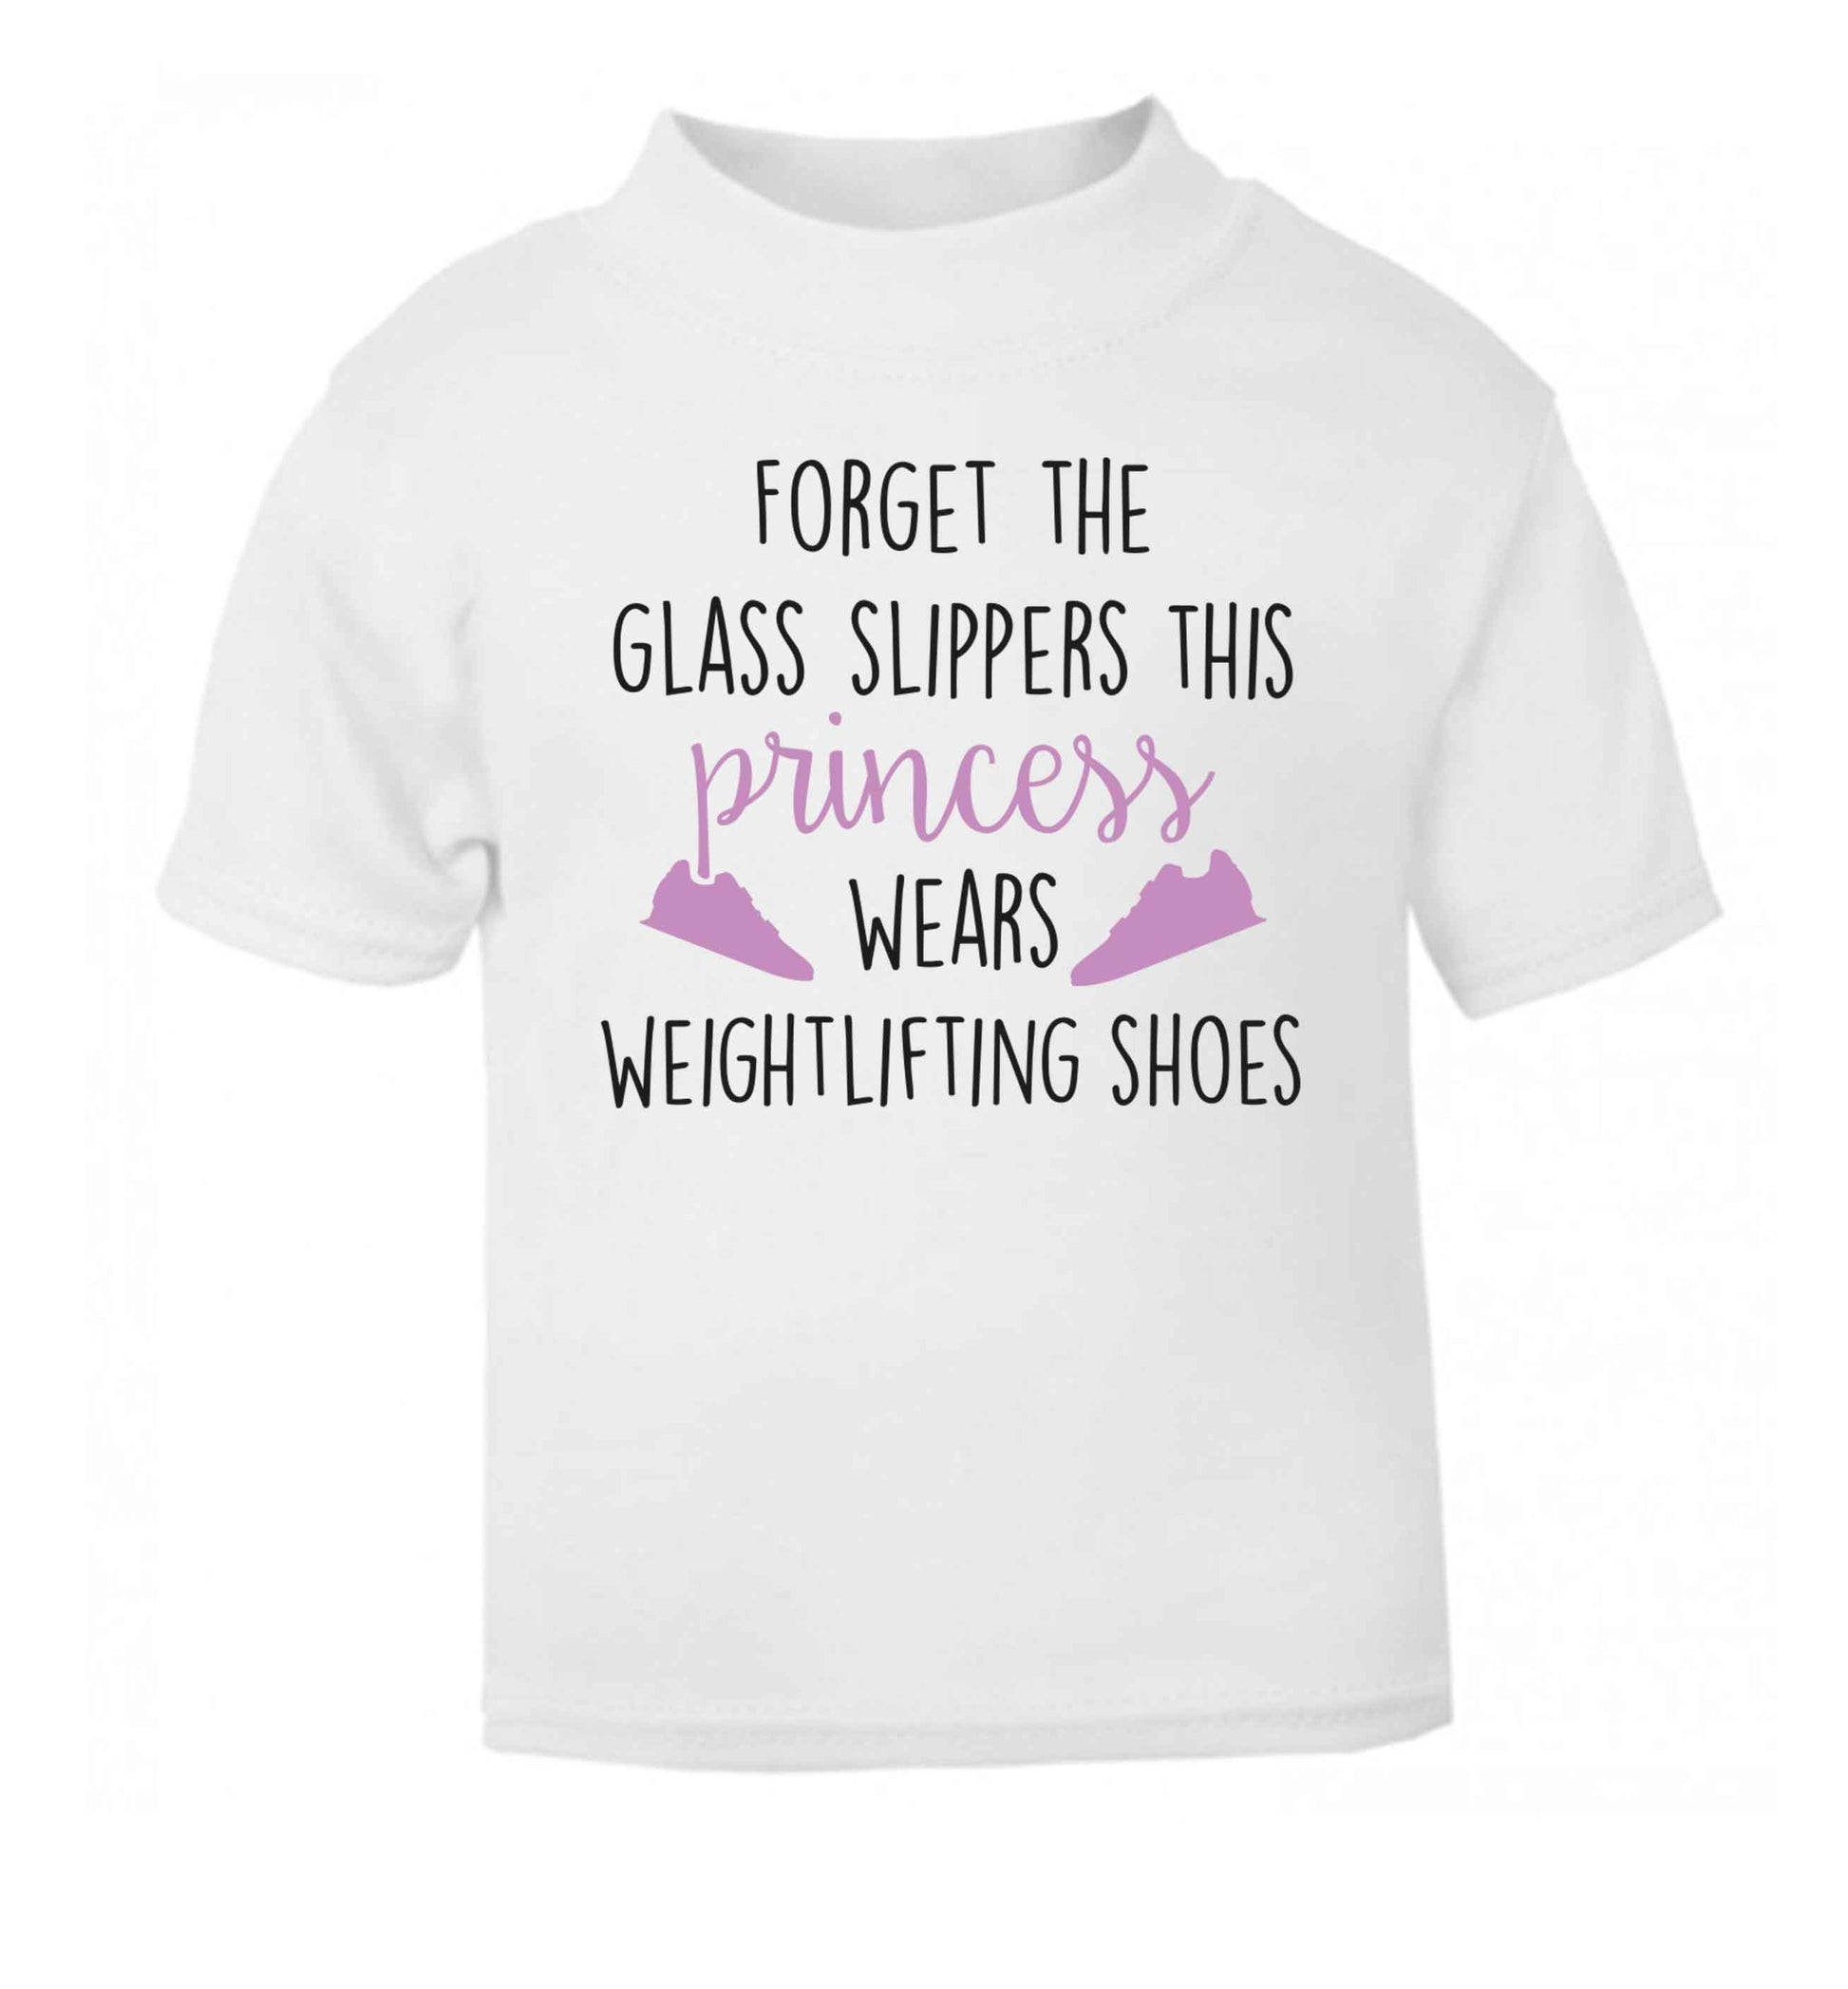 Forget the glass slippers this princess wears weightlifting shoes white Baby Toddler Tshirt 2 Years